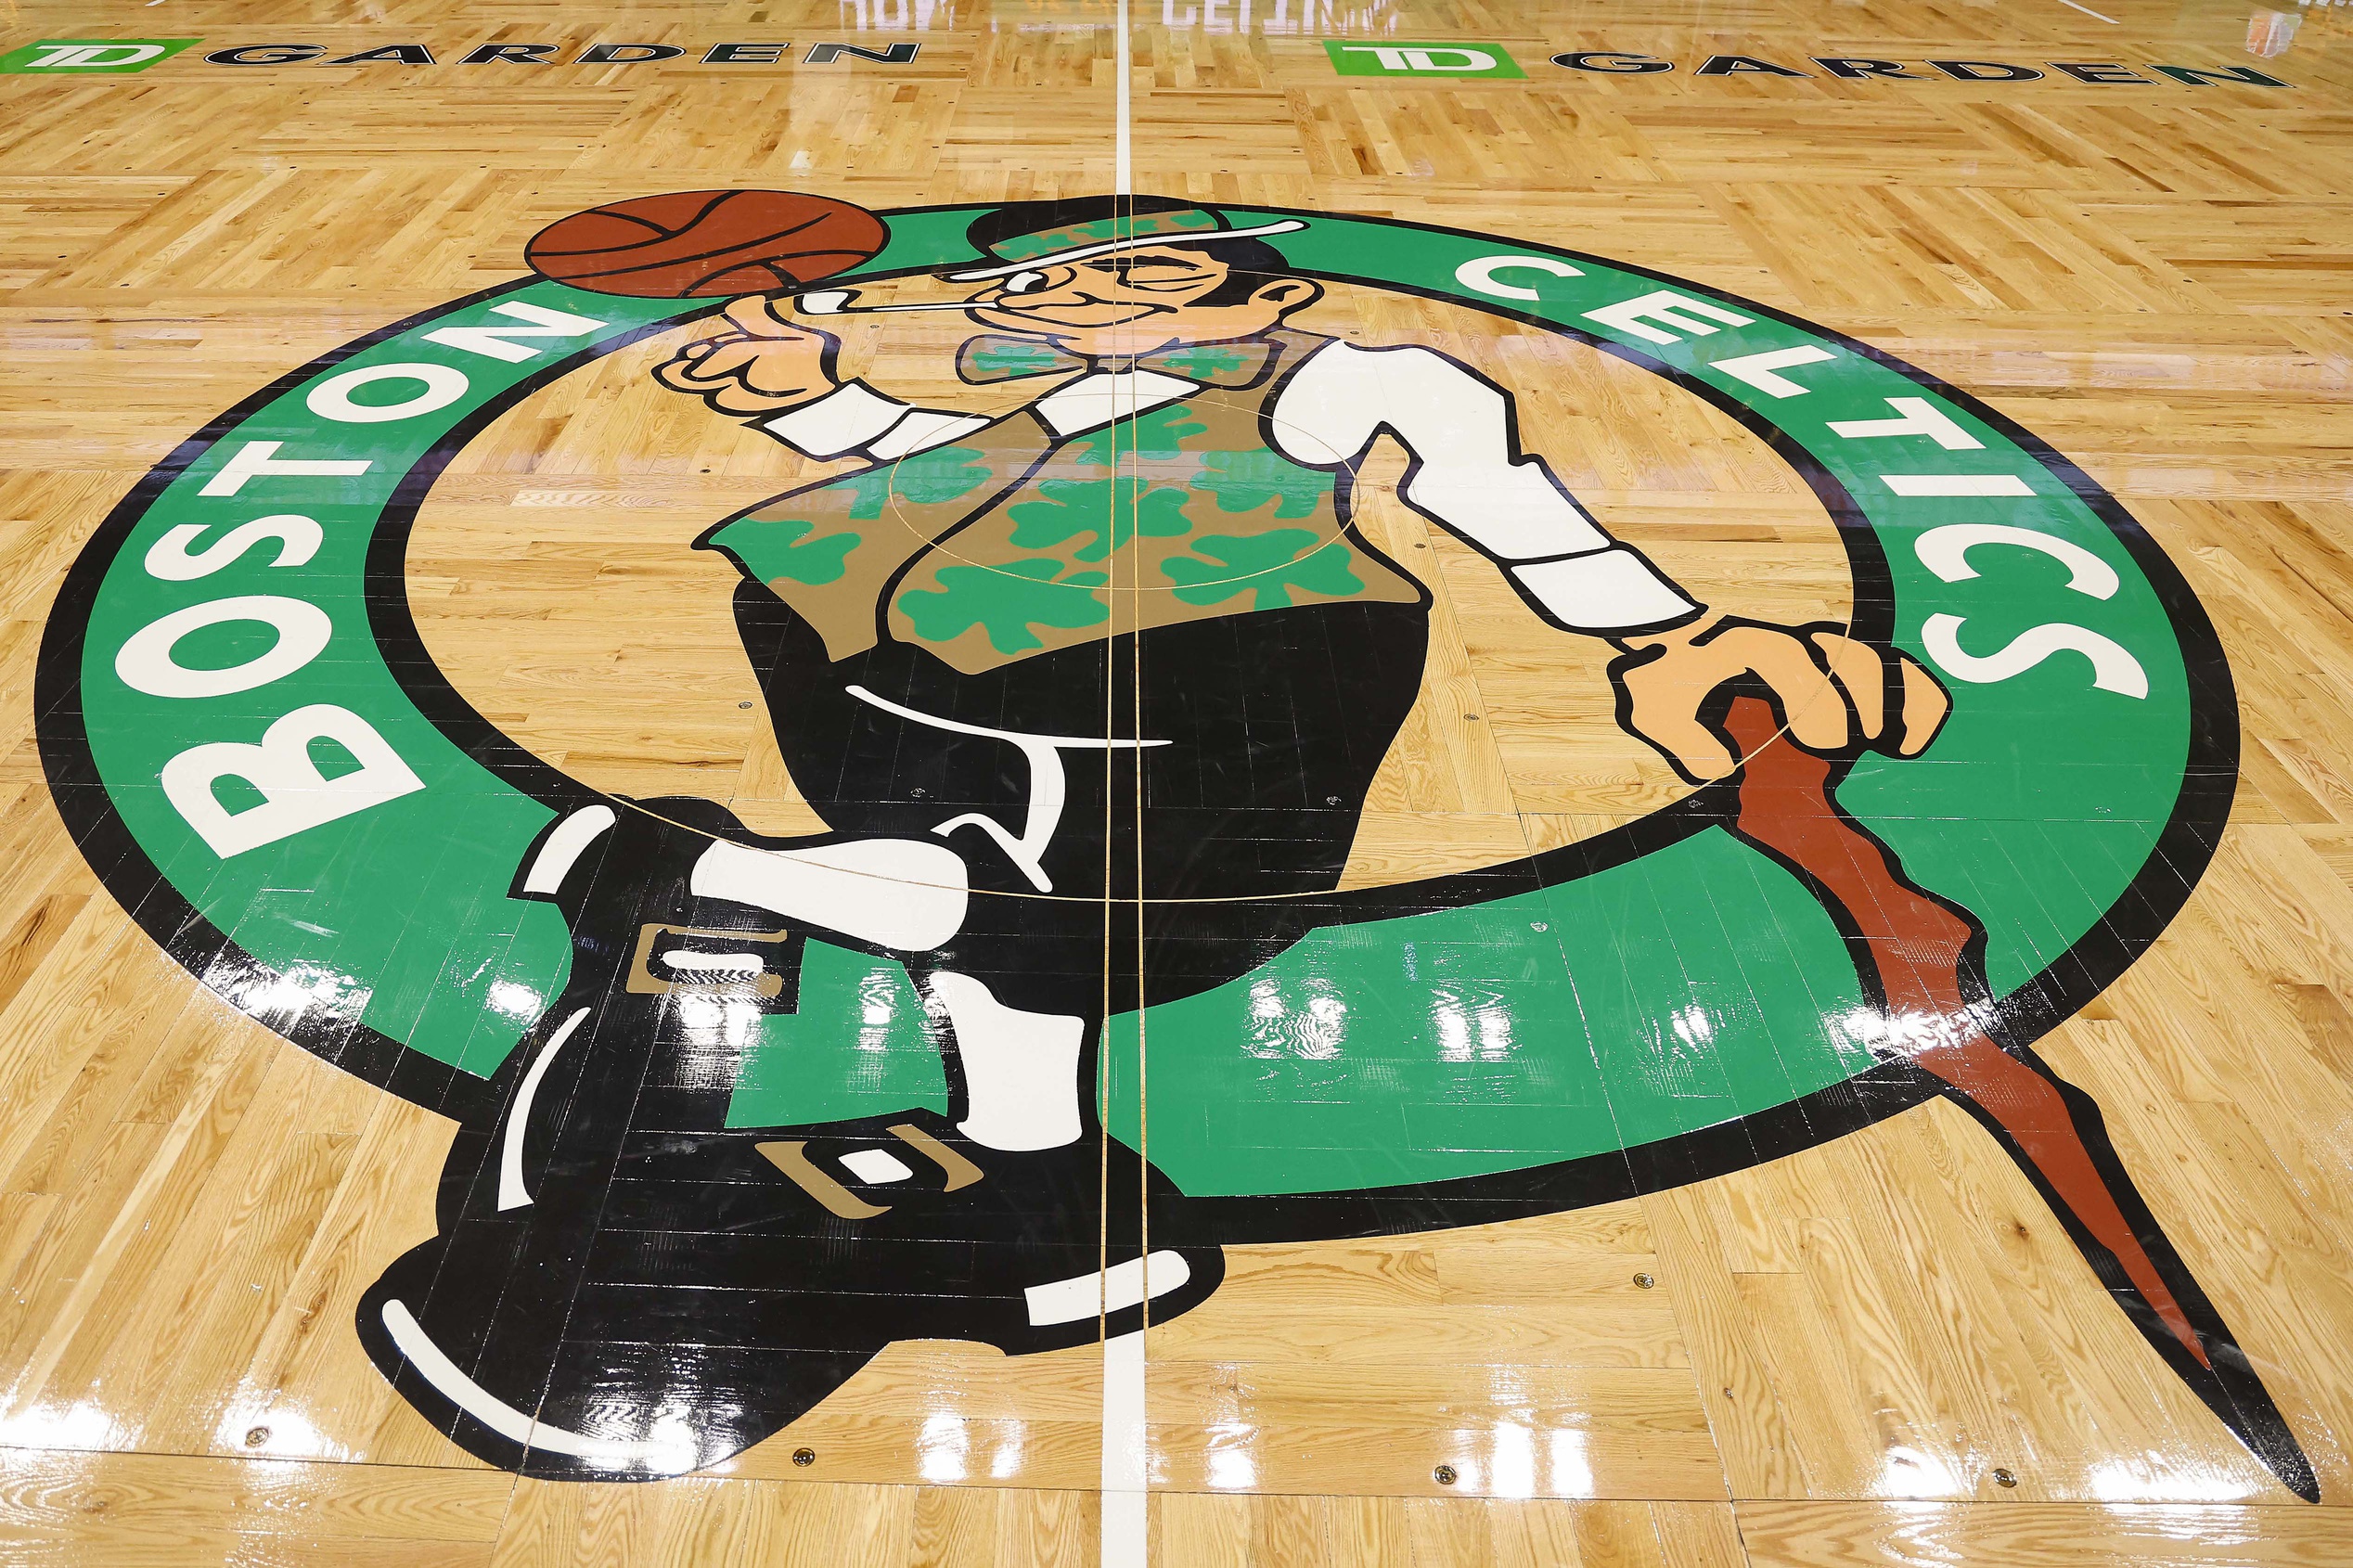 The Celtics are looking for some minor roster upgrades this free agency.